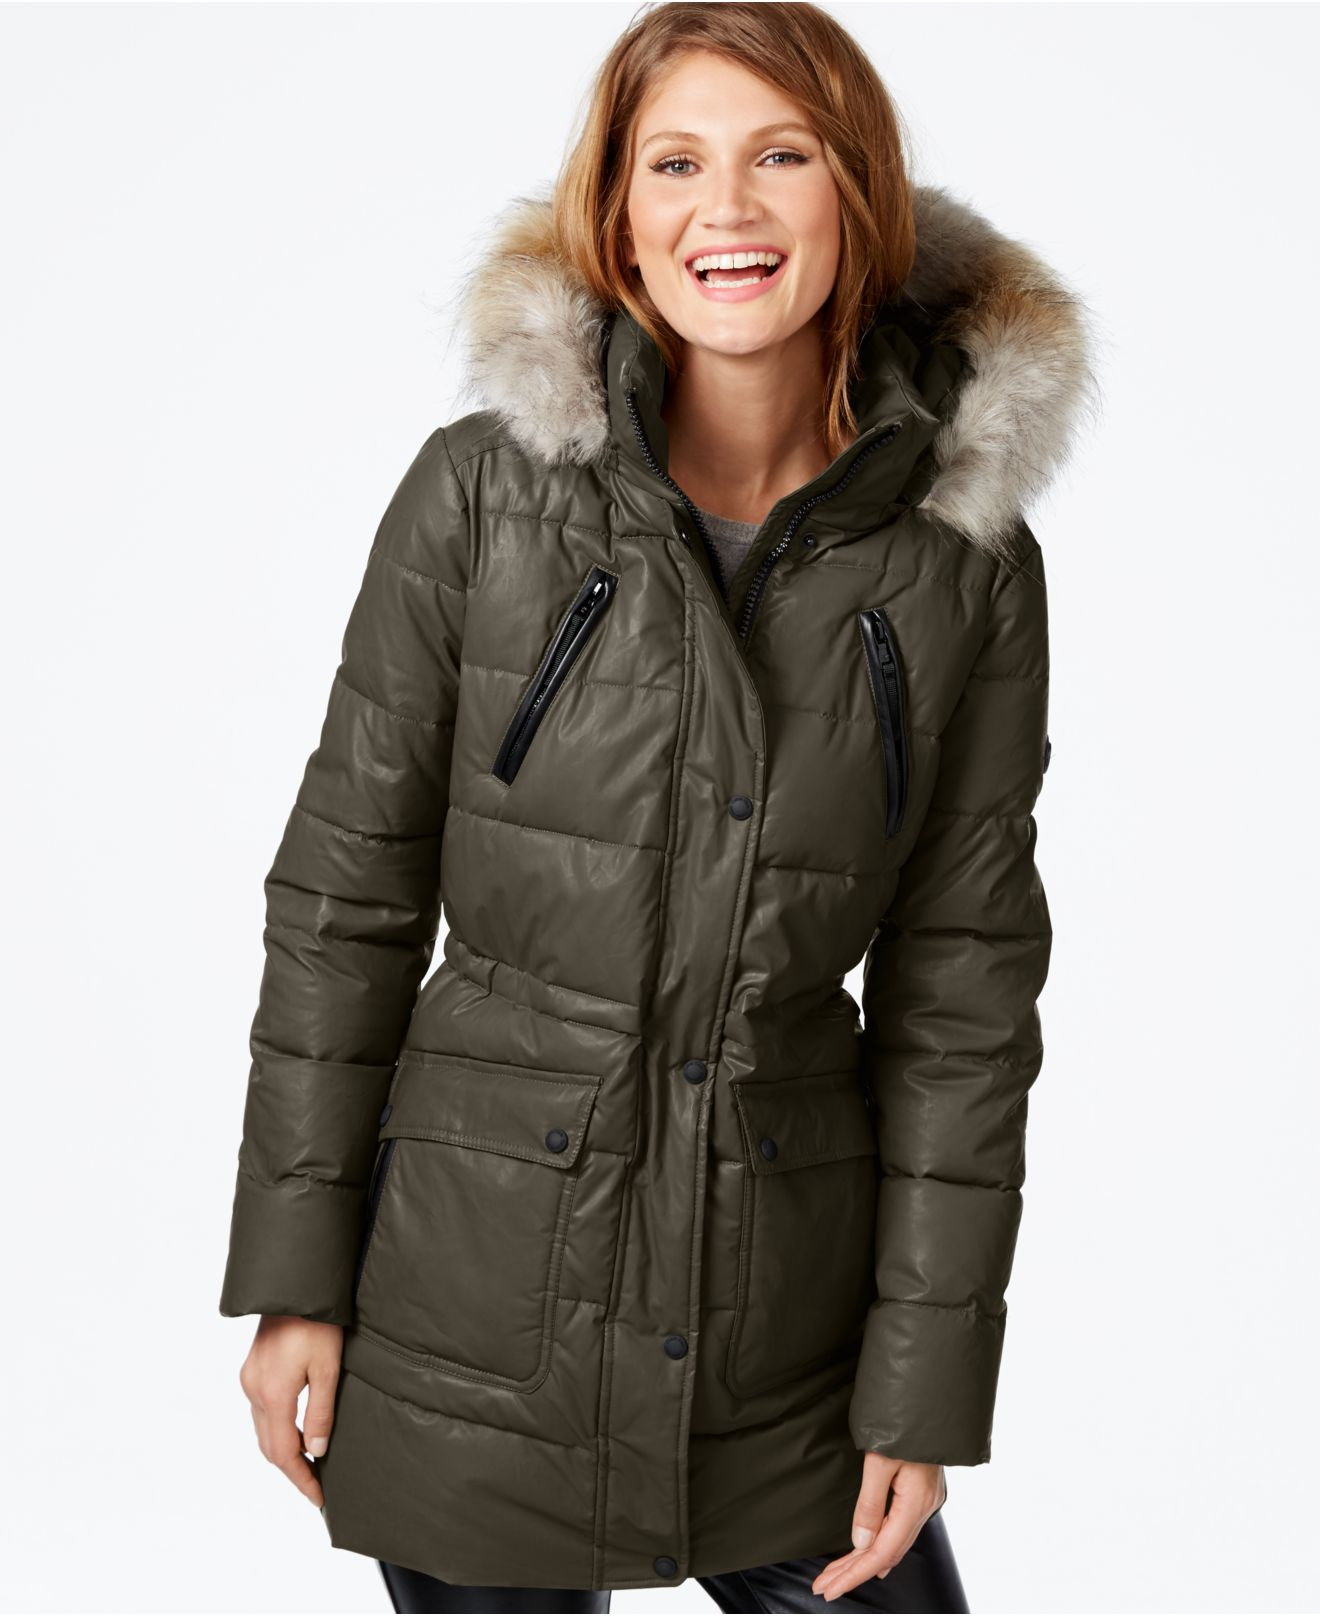 Calvin Klein Faux-fur-trim Waxed Cotton Puffer Coat in Olive (Green) - Lyst